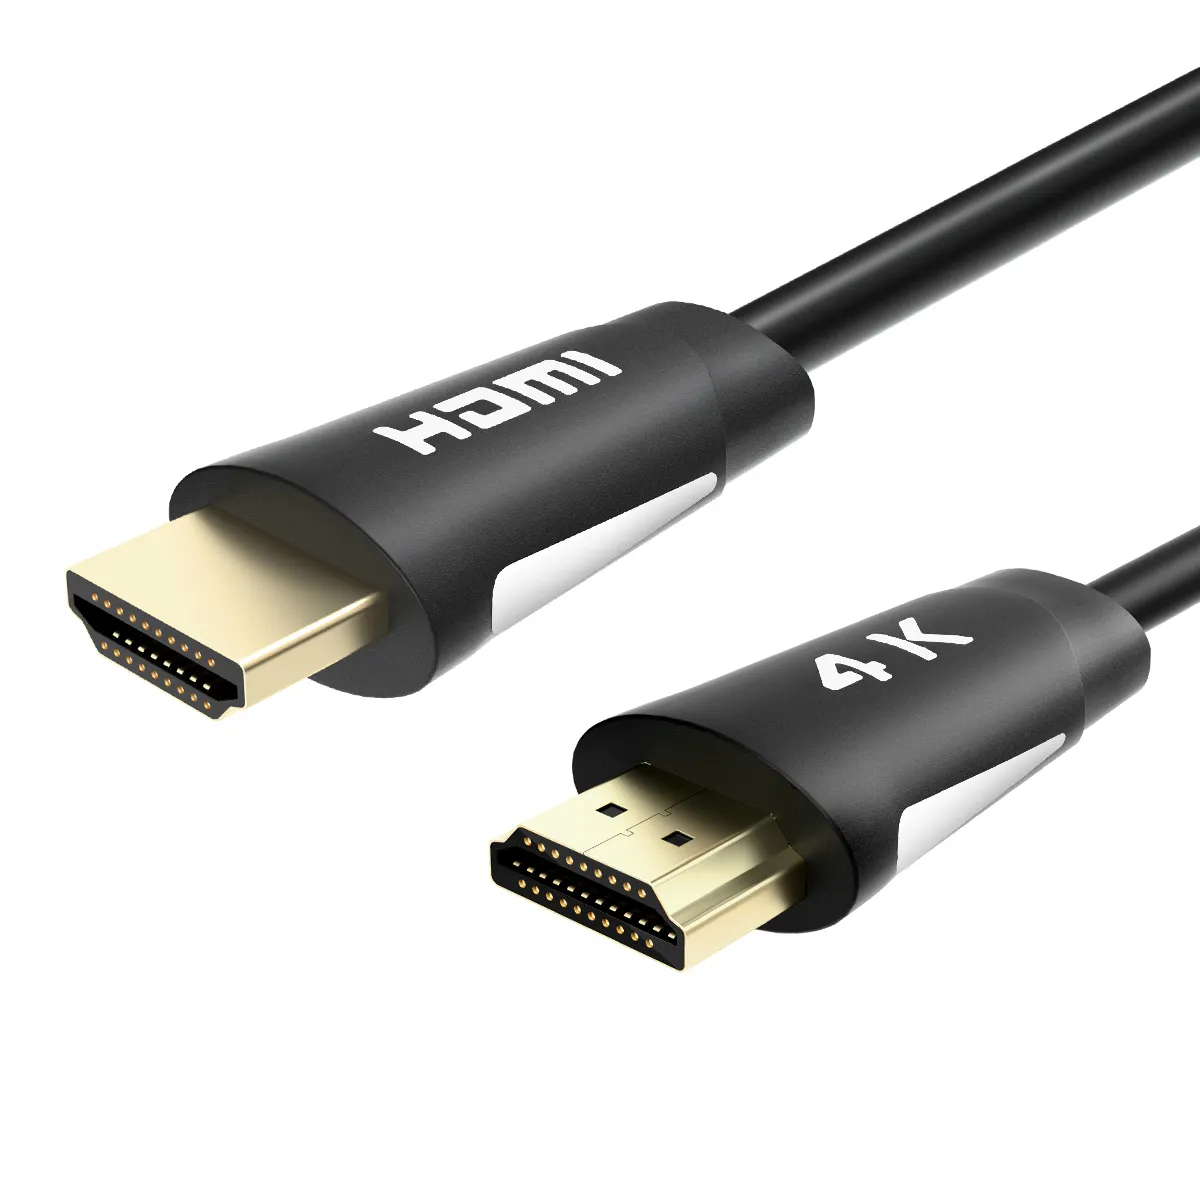 Flat Cable Manufacturer HDMI Cable 4K 60Hz High Speed 3m Digital HDMI Kabel 2.0 HDR10 18Gbps Gold Plated for Monitor TV